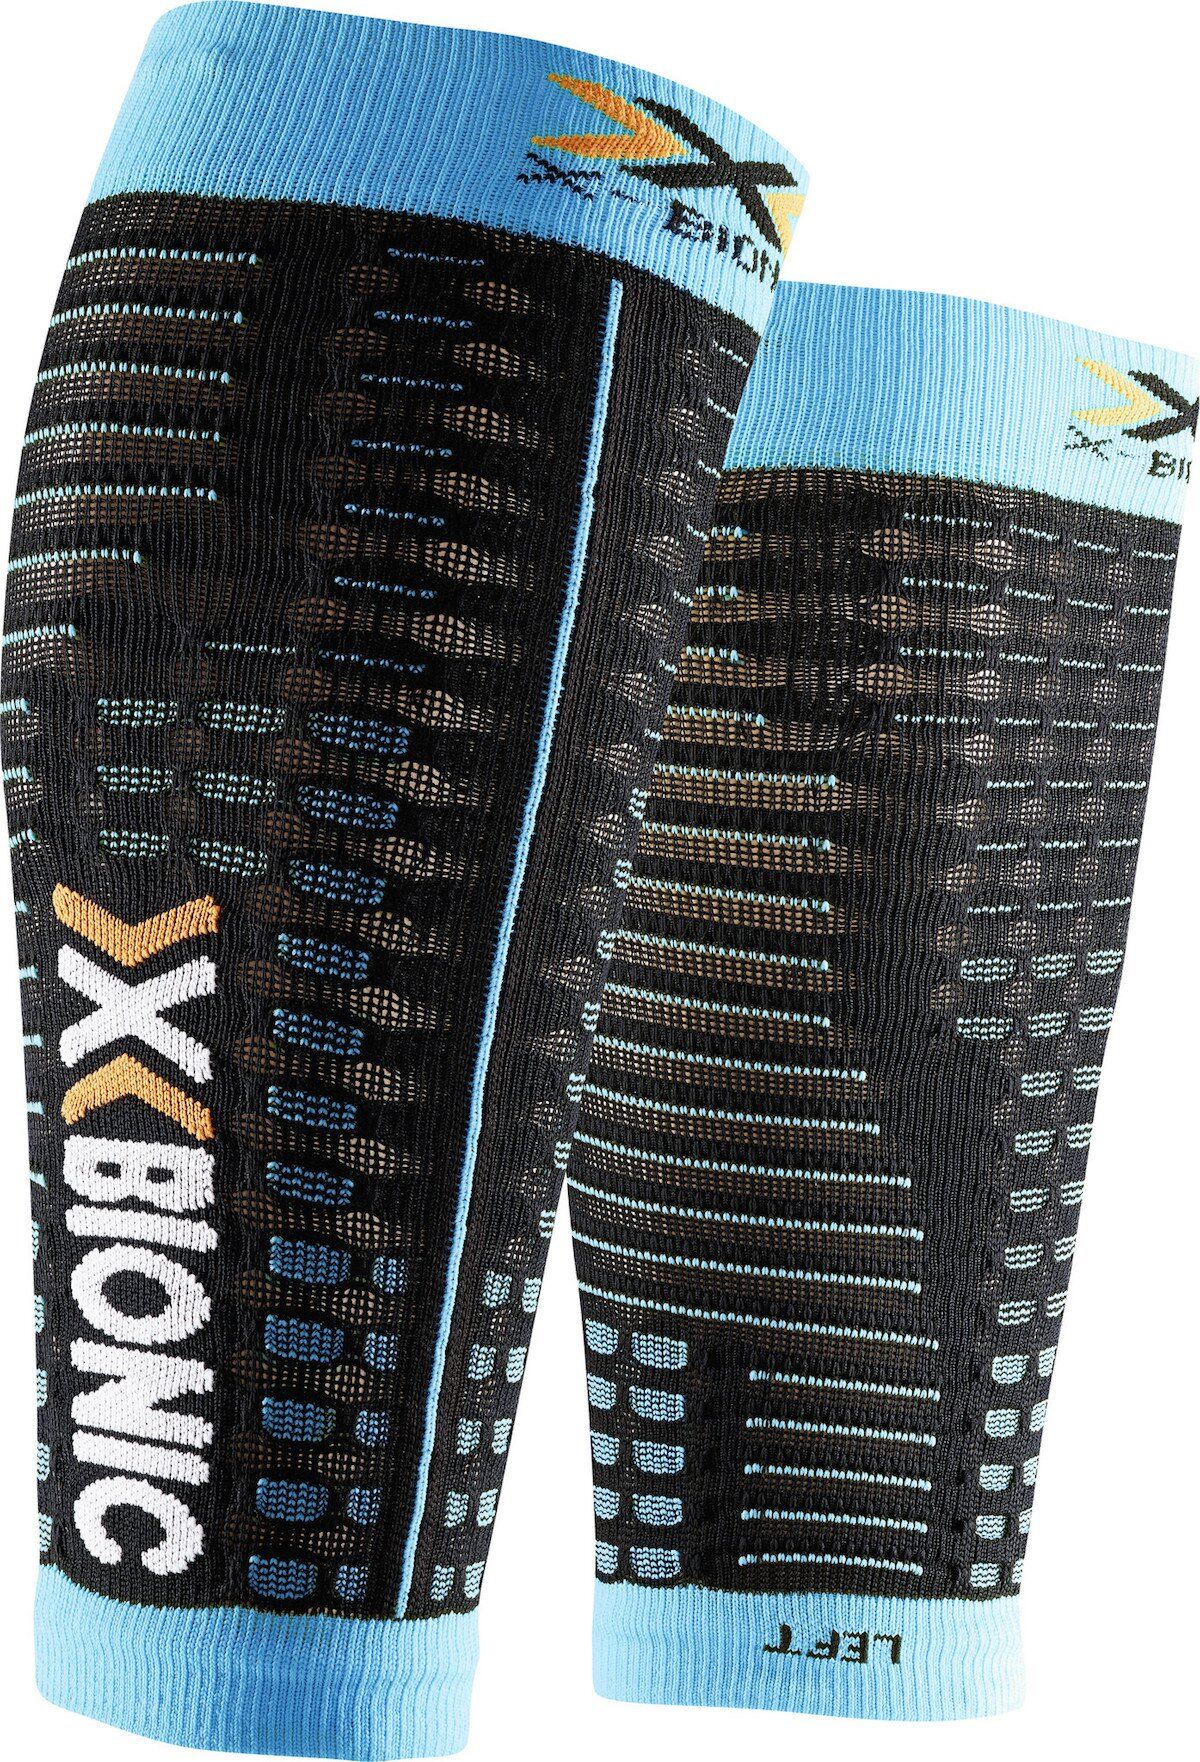 X-Bionic - Spyker Competition - Compression socks - Women's